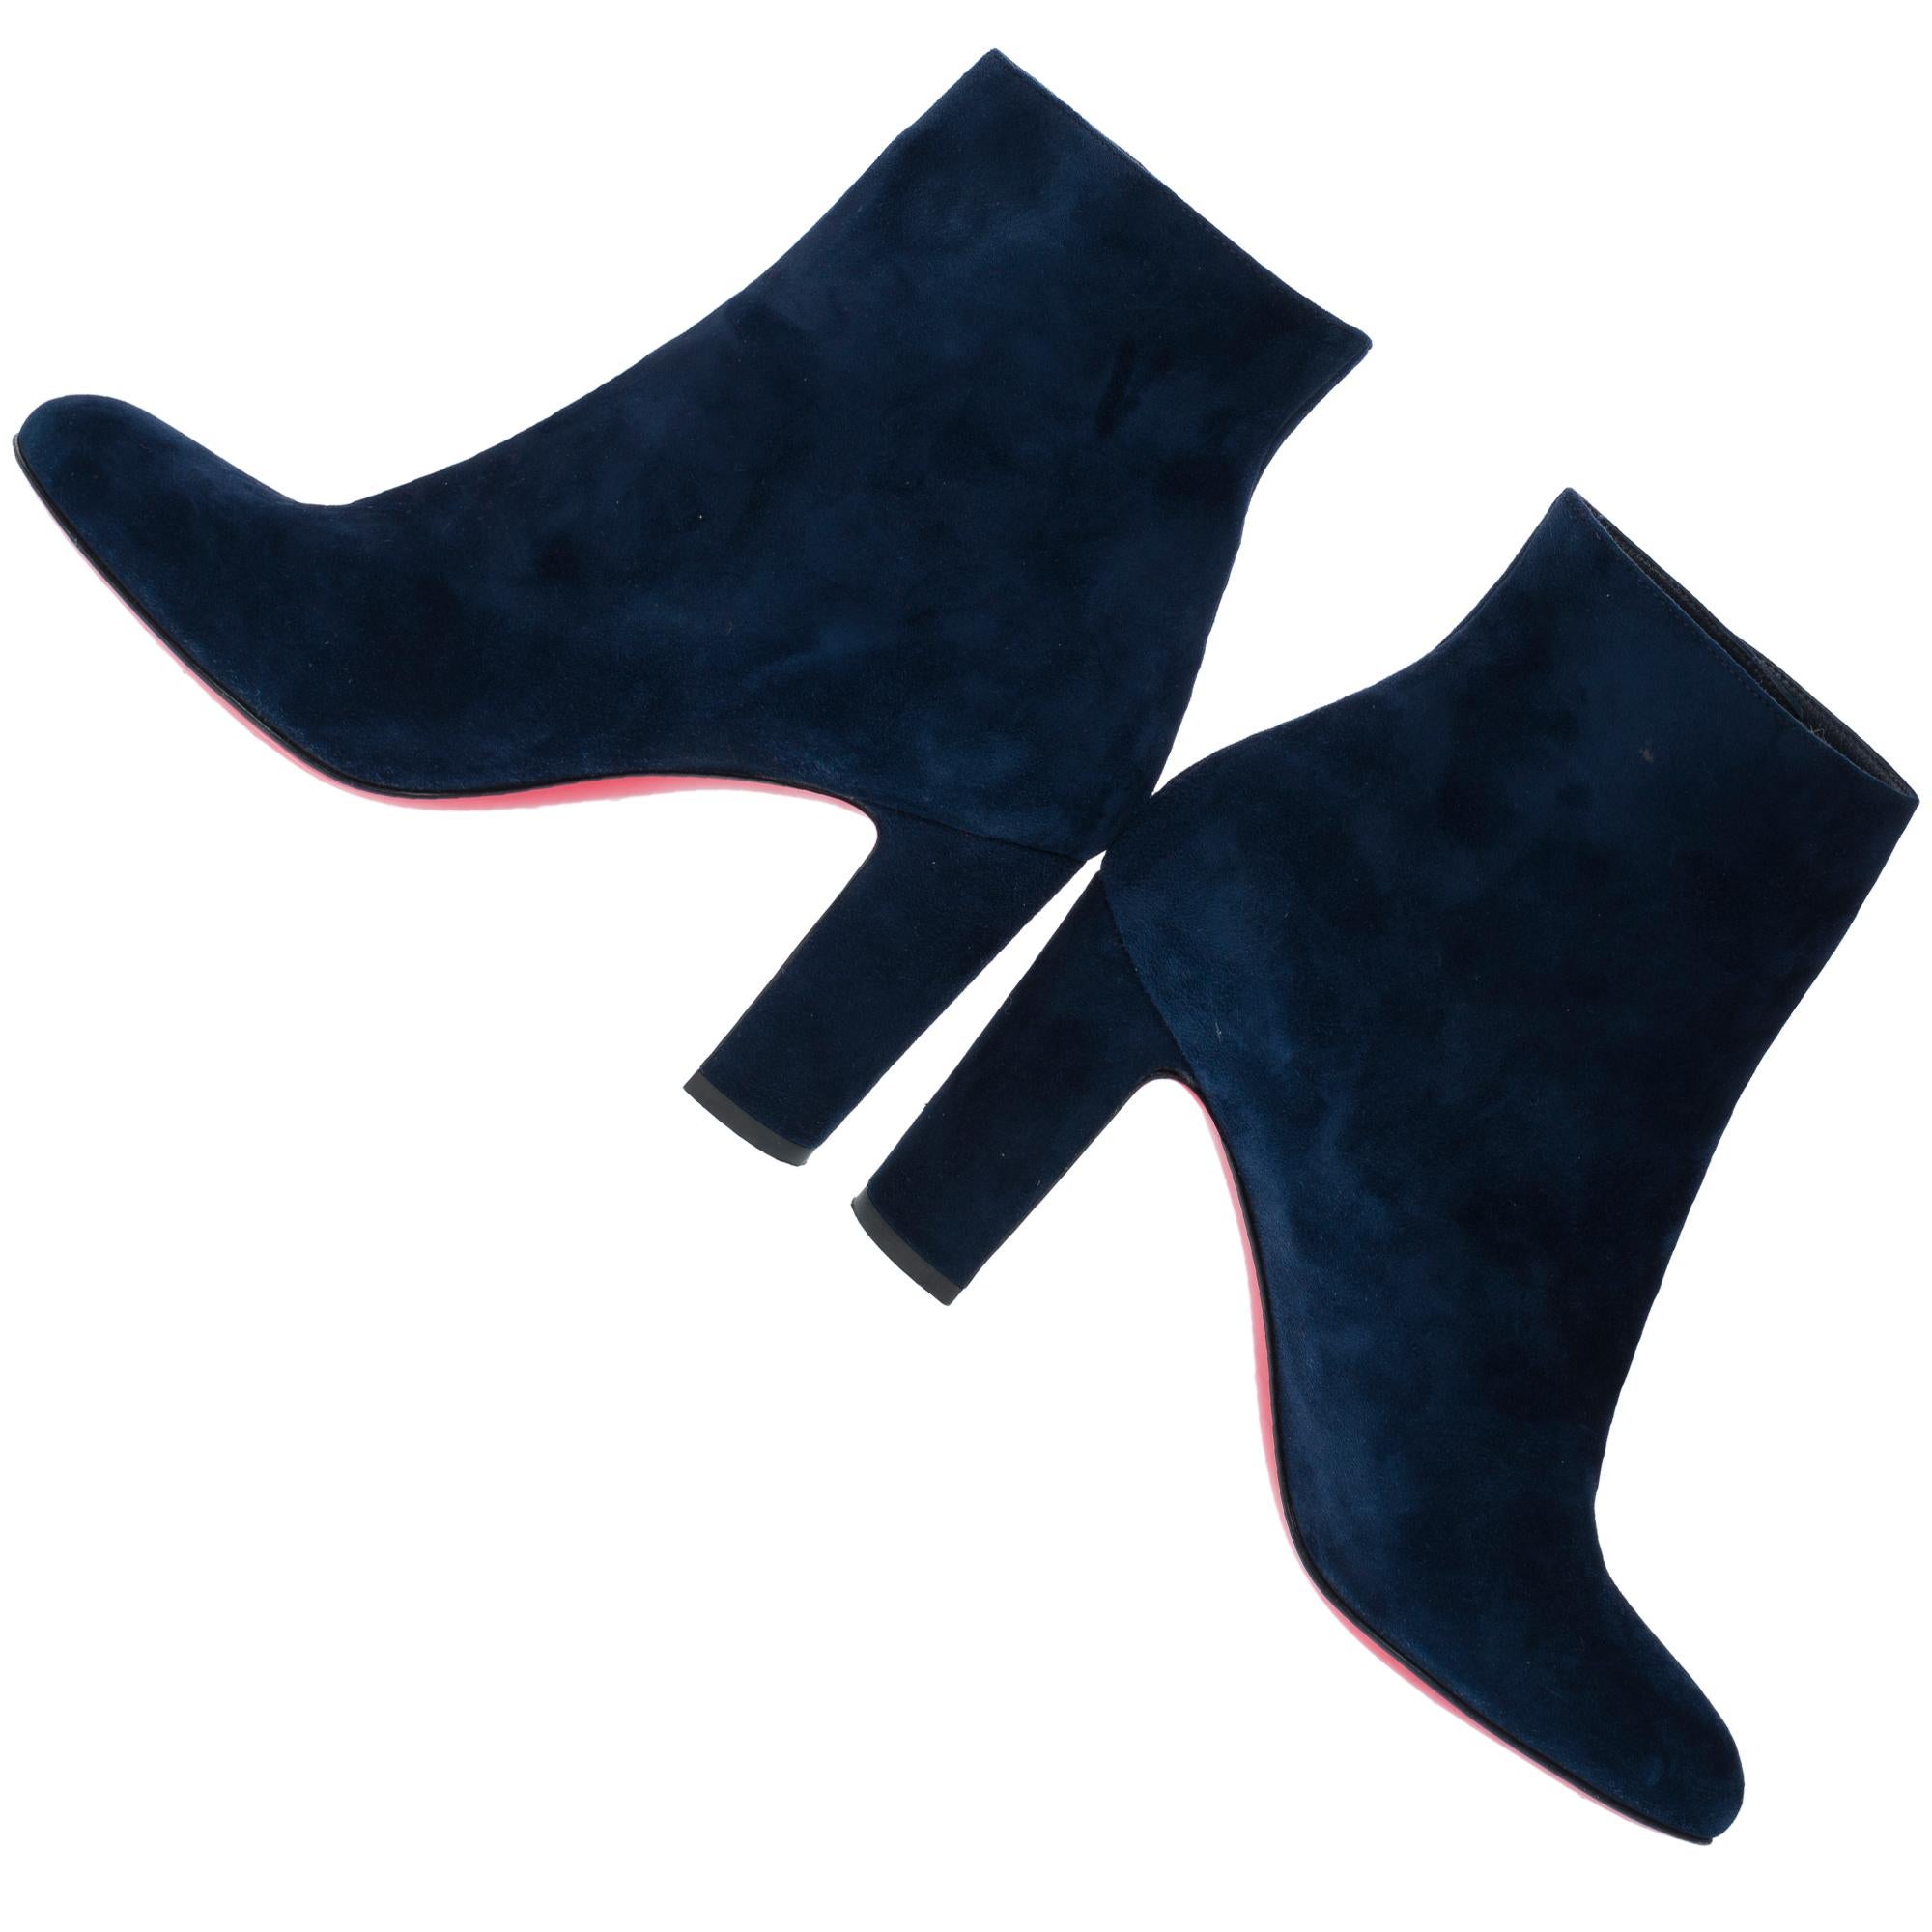 Christian Louboutin ankleboot in blue suede, size 37 For Sale 4